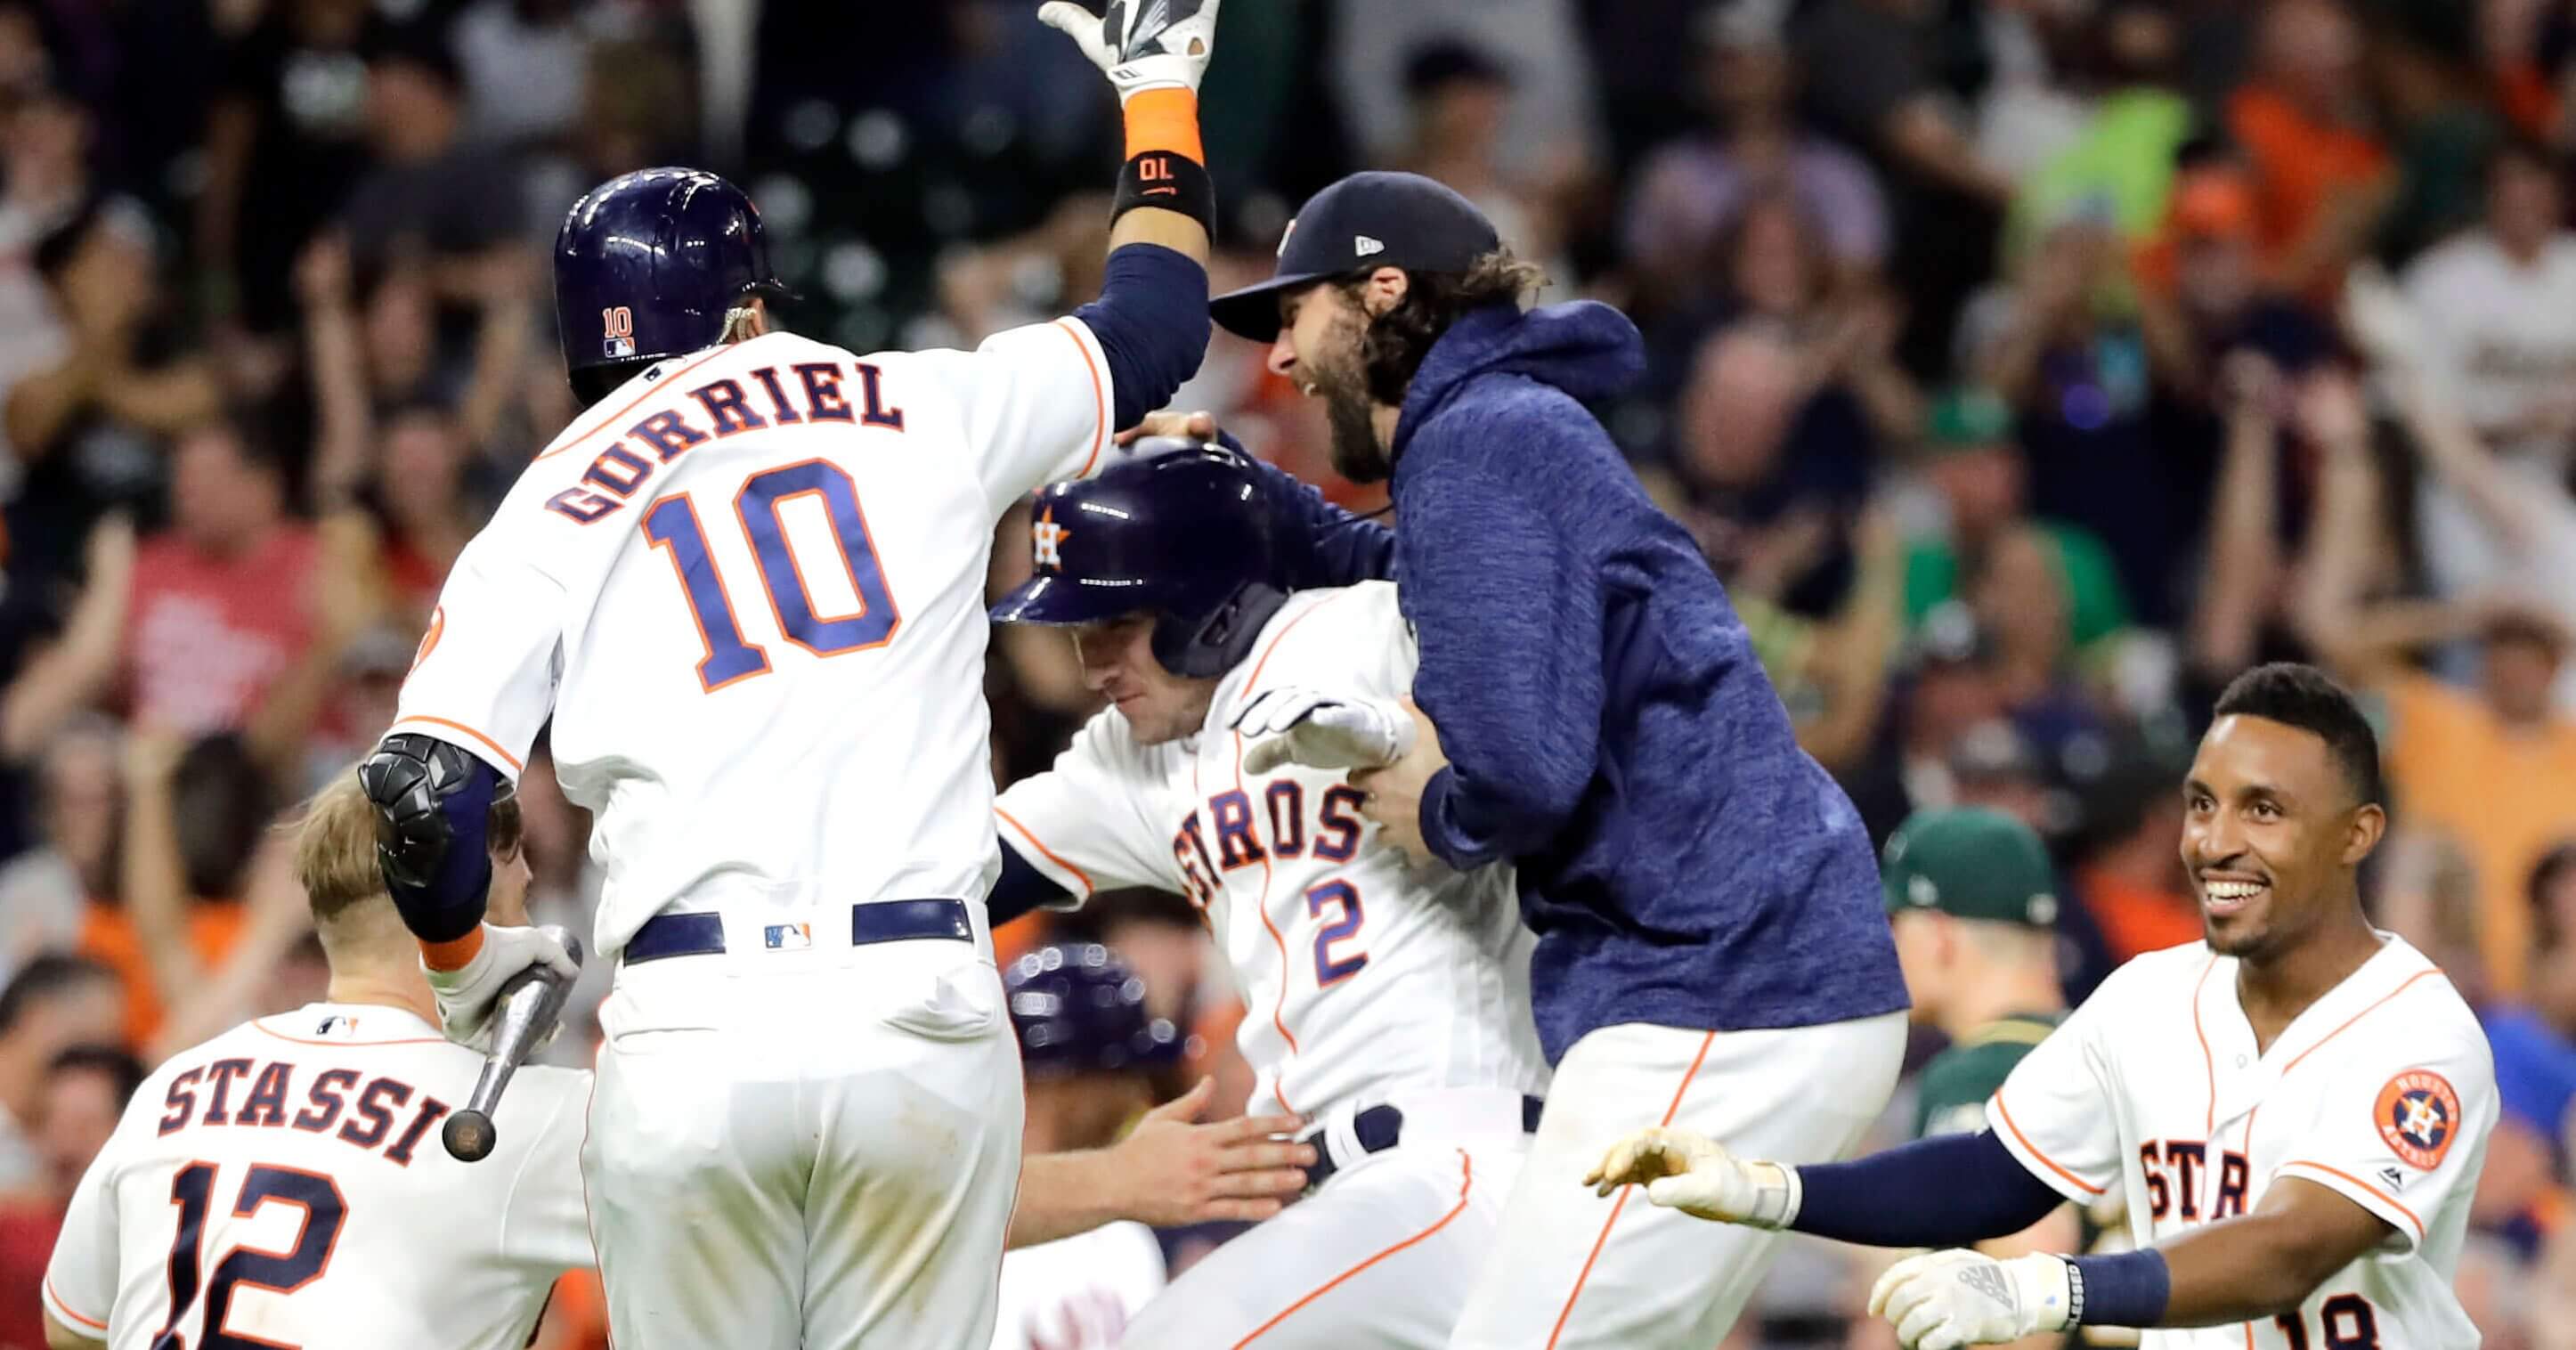 Houston Astros' Alex Bregman (2) celebrates with teammates after hitting a ground ball to Oakland Athletics catcher Jonathan Lucroy to score Kyle Tucker during the 11th inning of a baseball game Tuesday, July 10, 2018, in Houston. The Astros won 6-5.